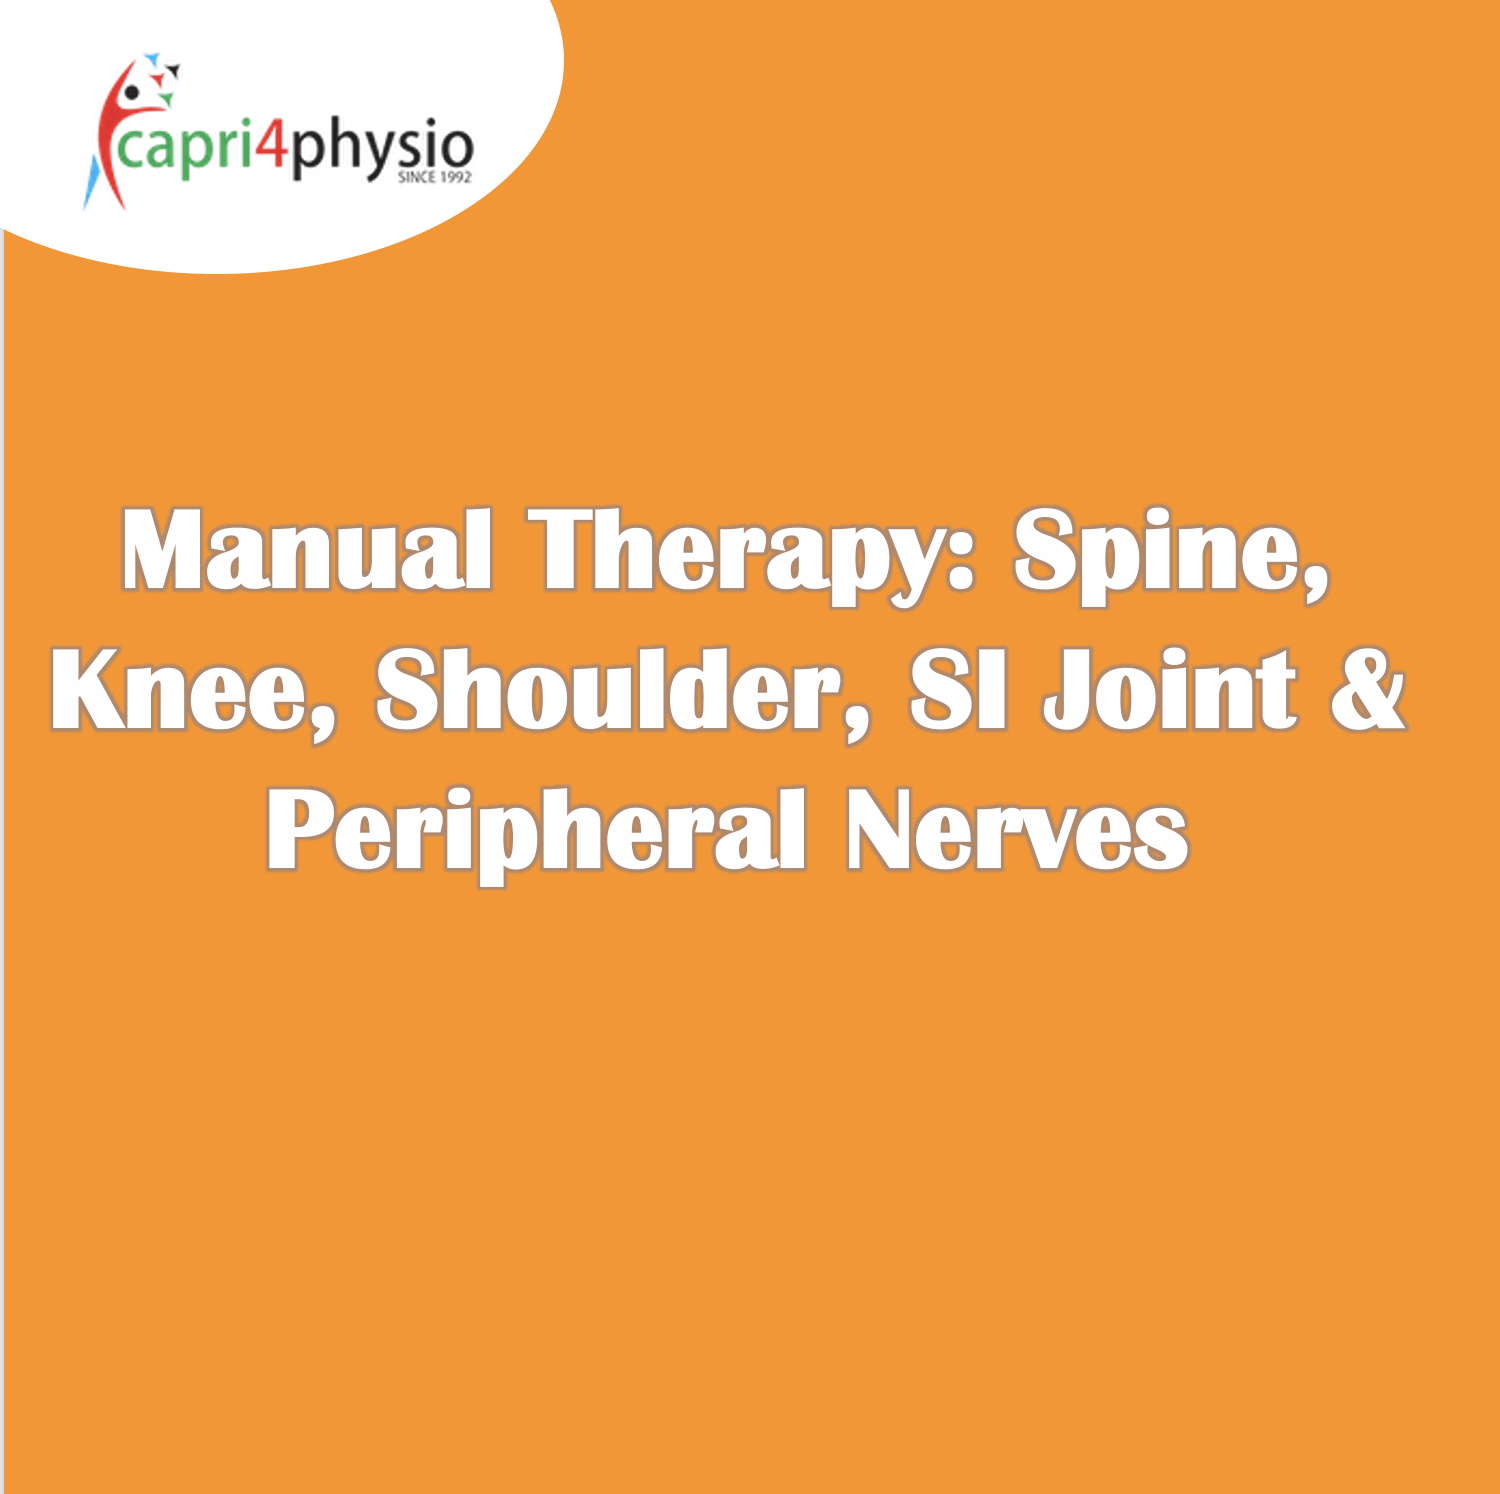 Manual Therapy: Spine, Knee, Shoulder, SI Joint & Peripheral Nerves